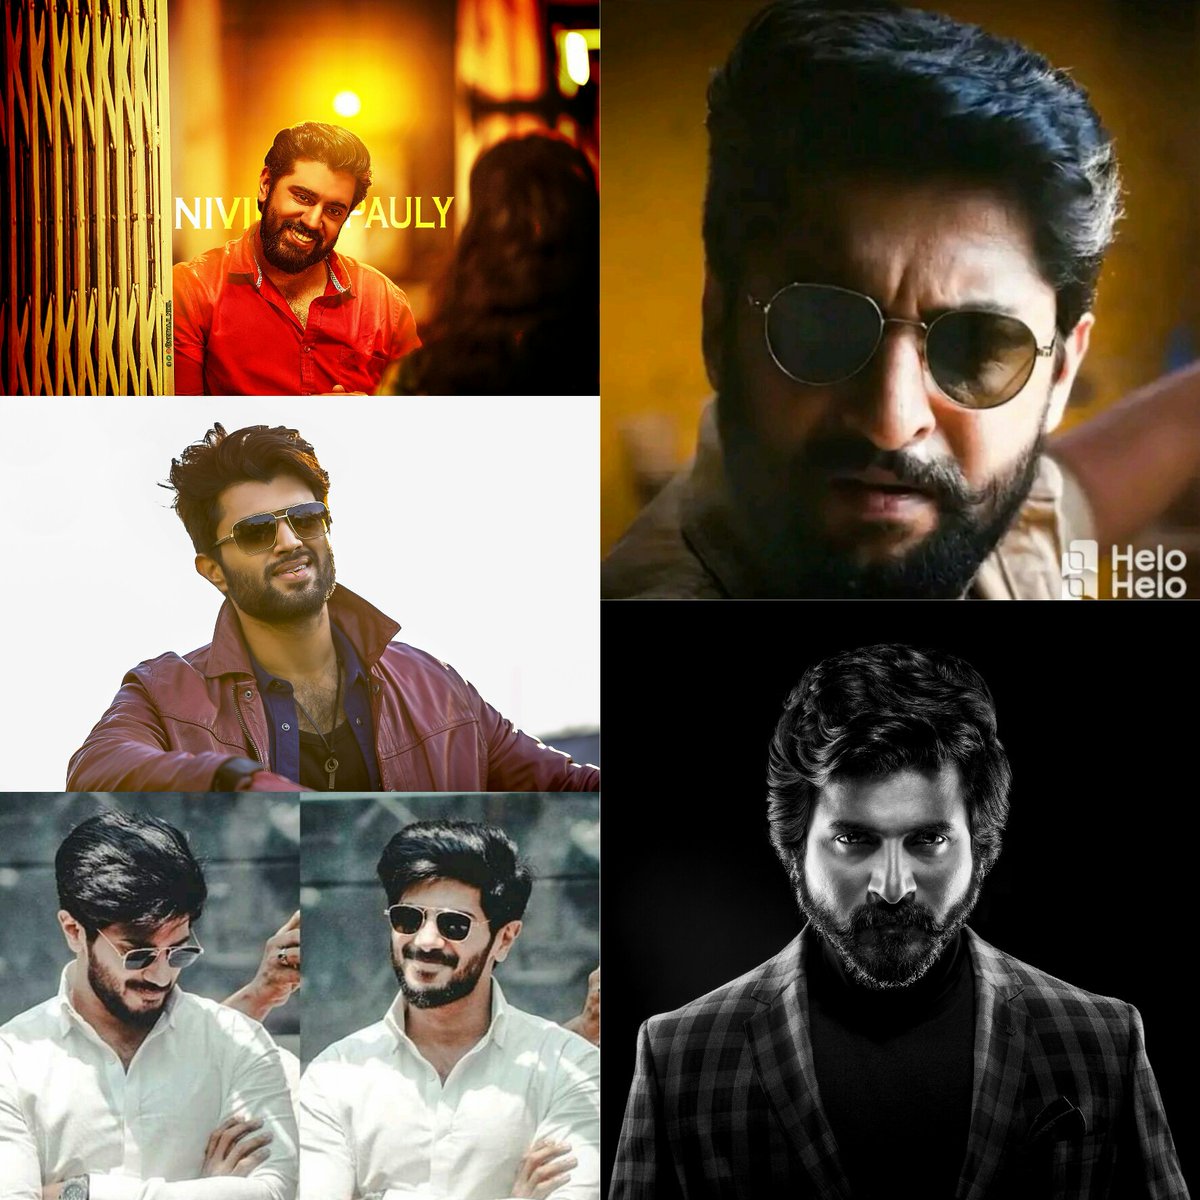 These star are the next big things in their respective industry KGF dialogues Nivin pauly,DQ,Nani,VJD,SK versionJust a small sync